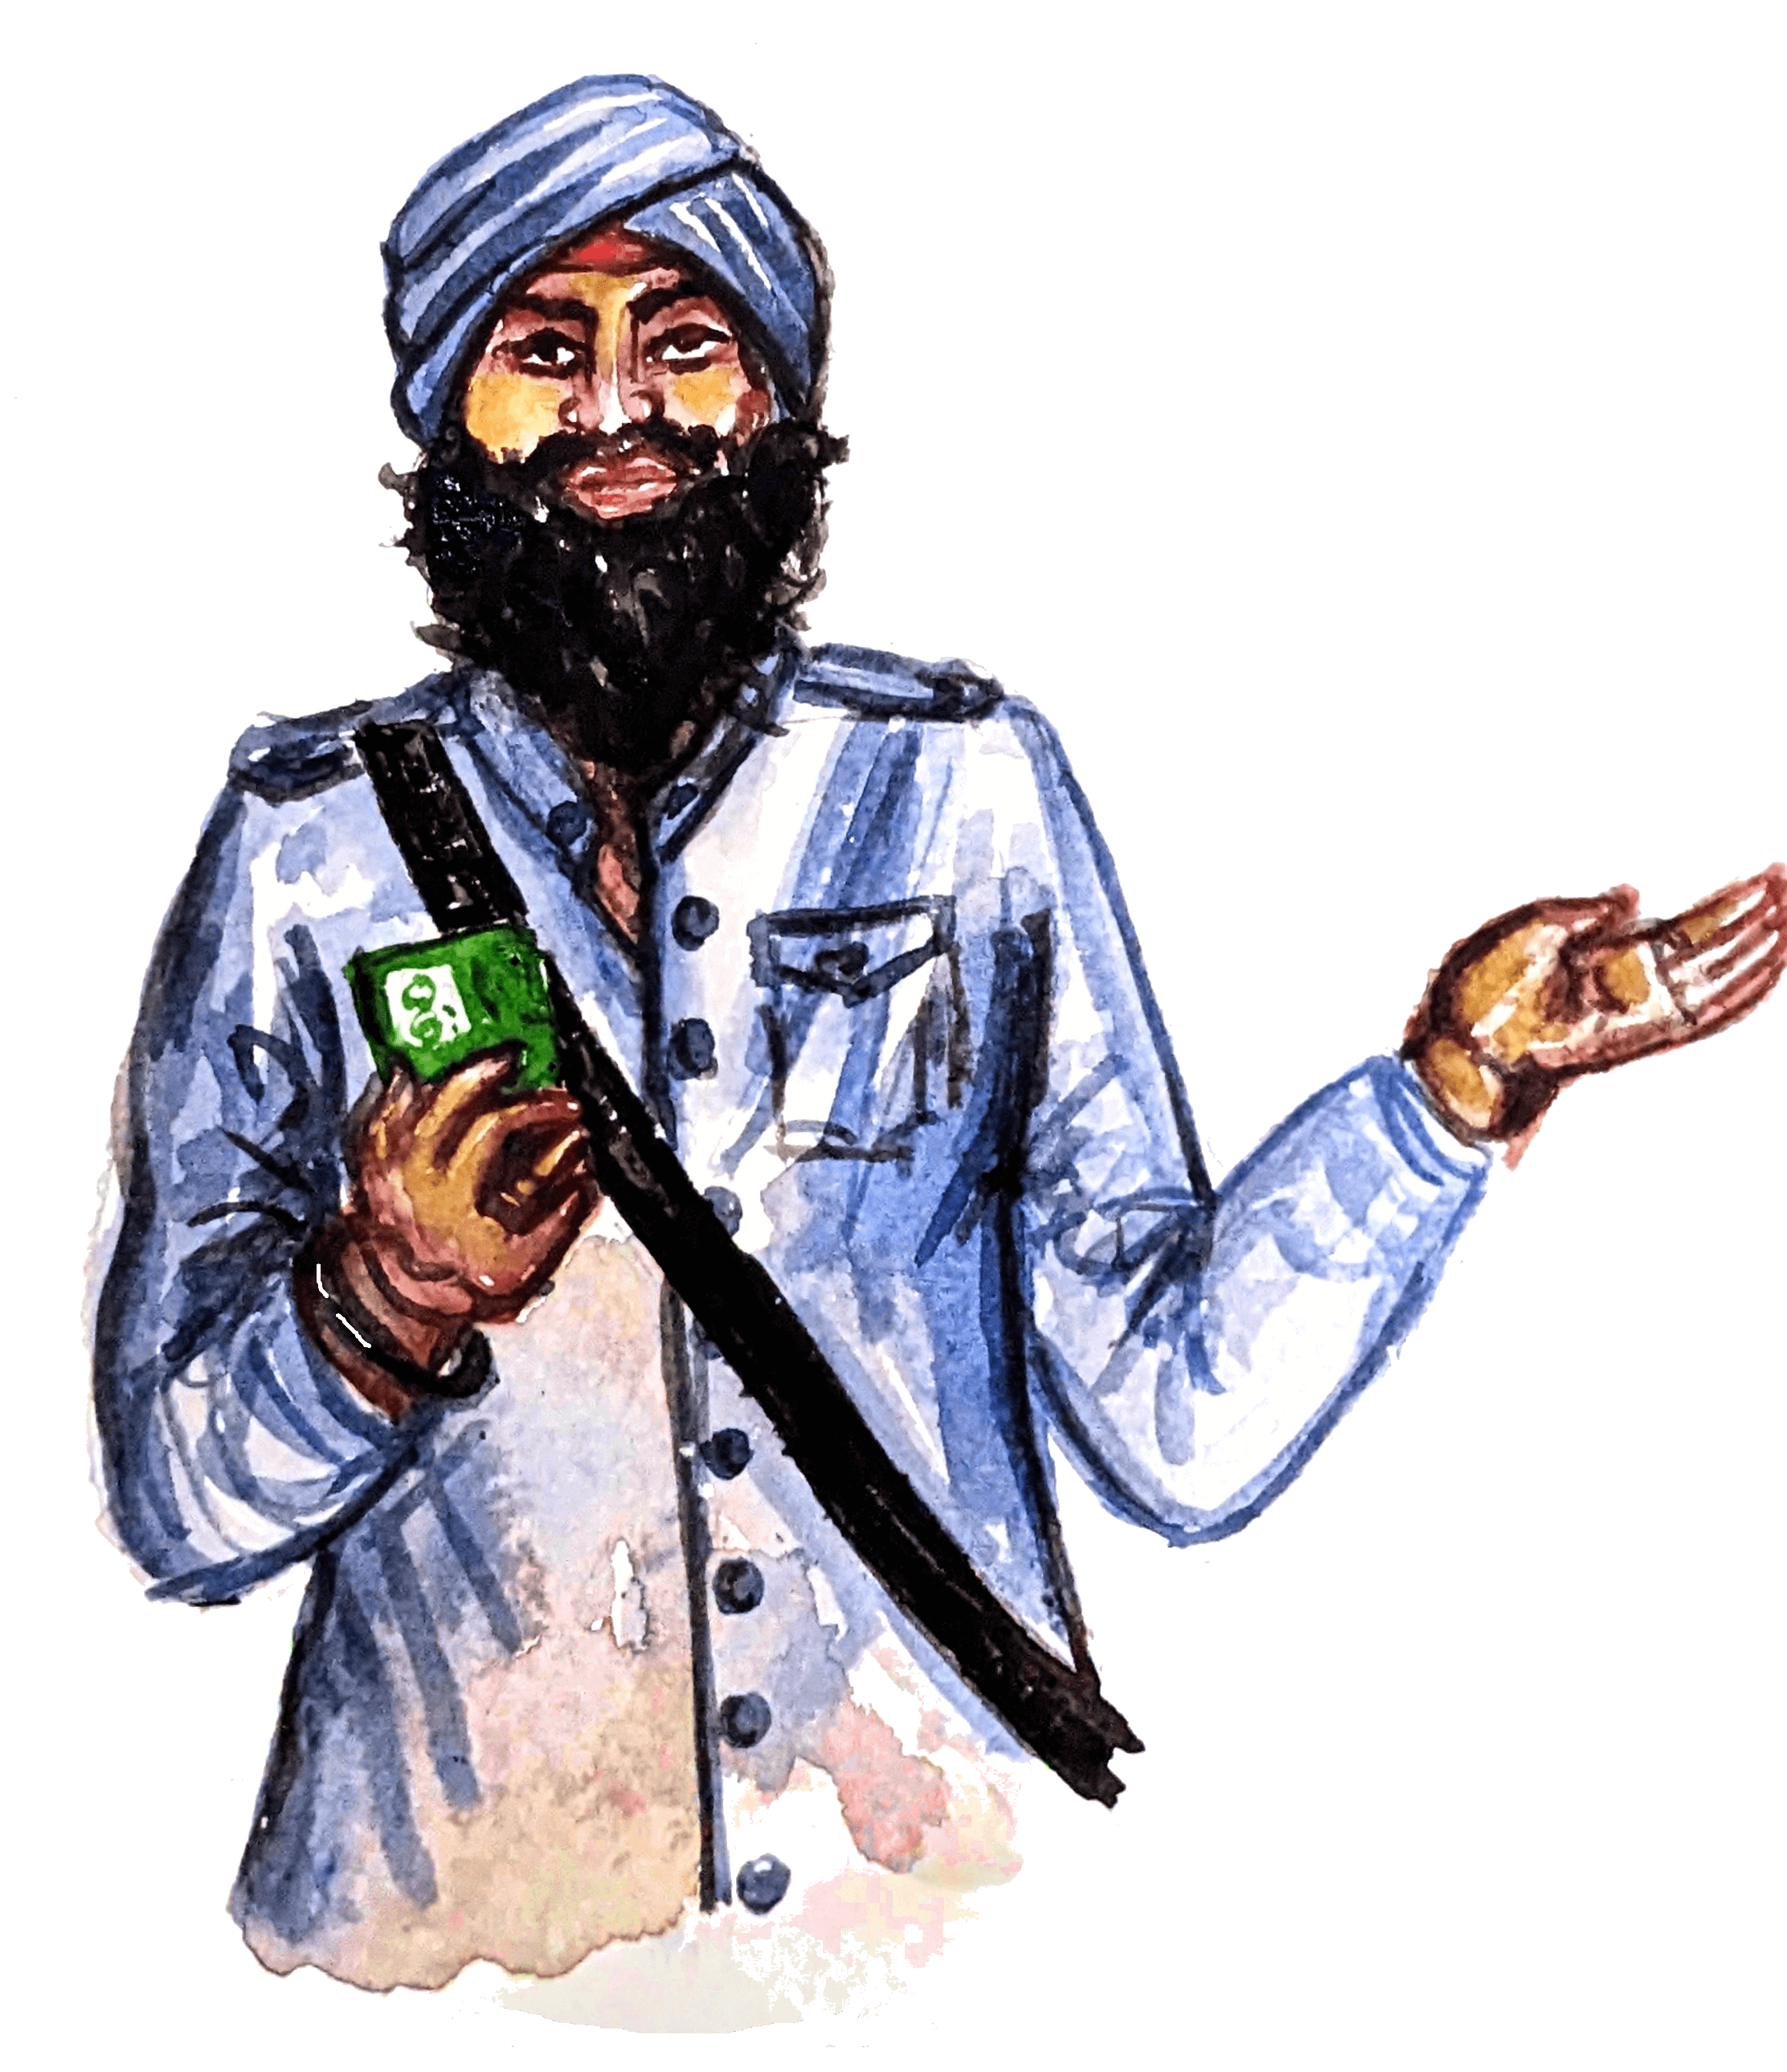 Water color painting of a Sikh Man